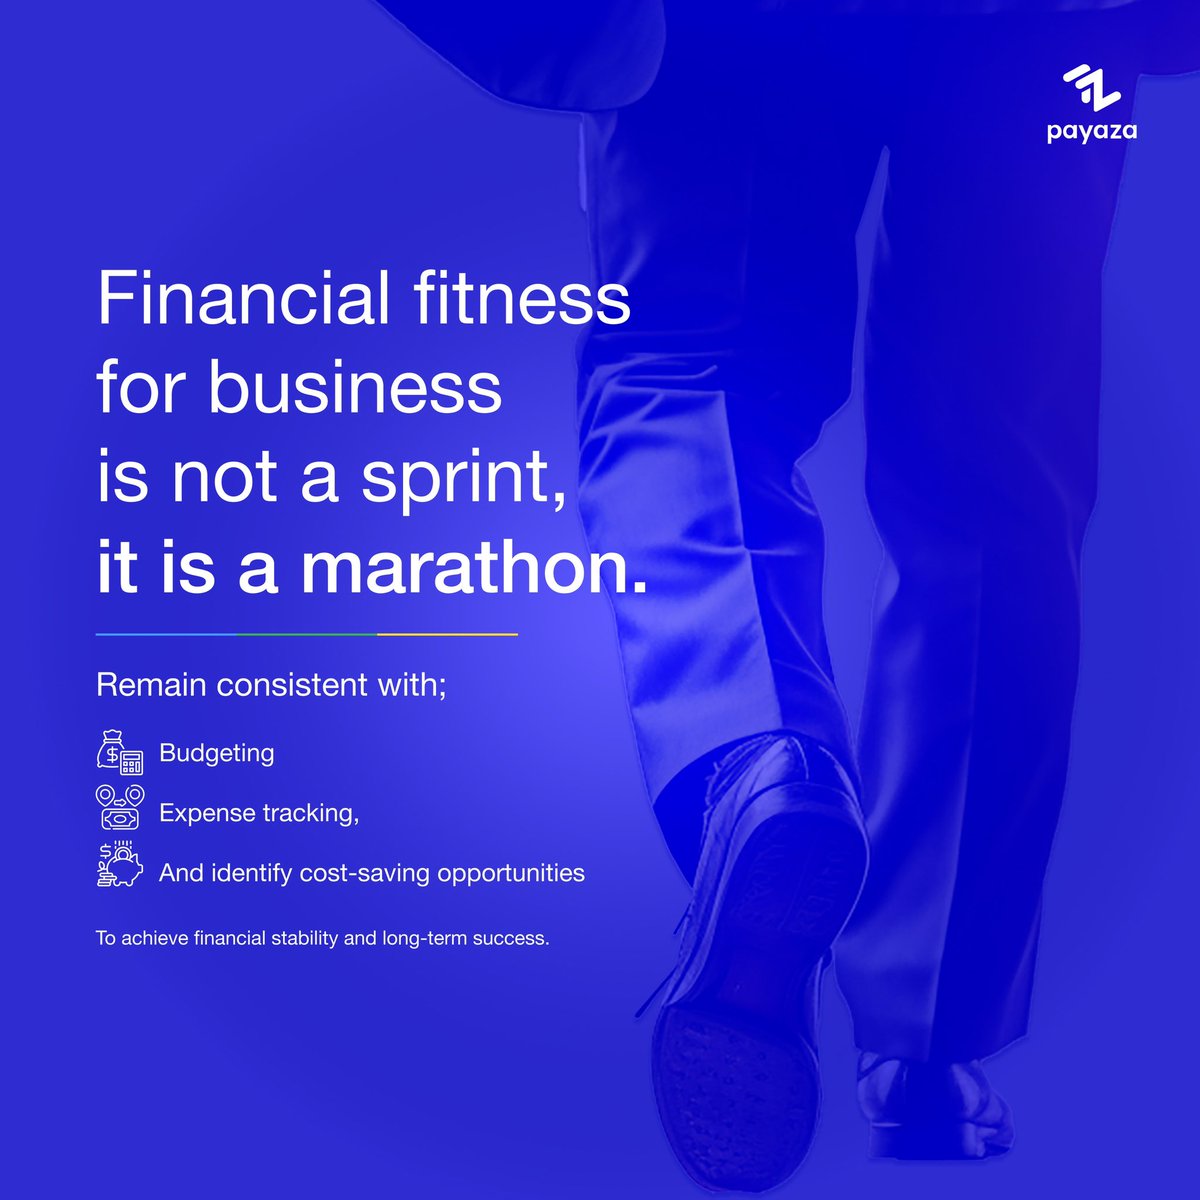 It's the steady effort and commitment to financial discipline that lead to long-term success. 

Keep pushing forward towards your goals, one step at a time.

#Payaza #SeamlessTransactions #BusinessSuccess #Budgeting #CostSaving